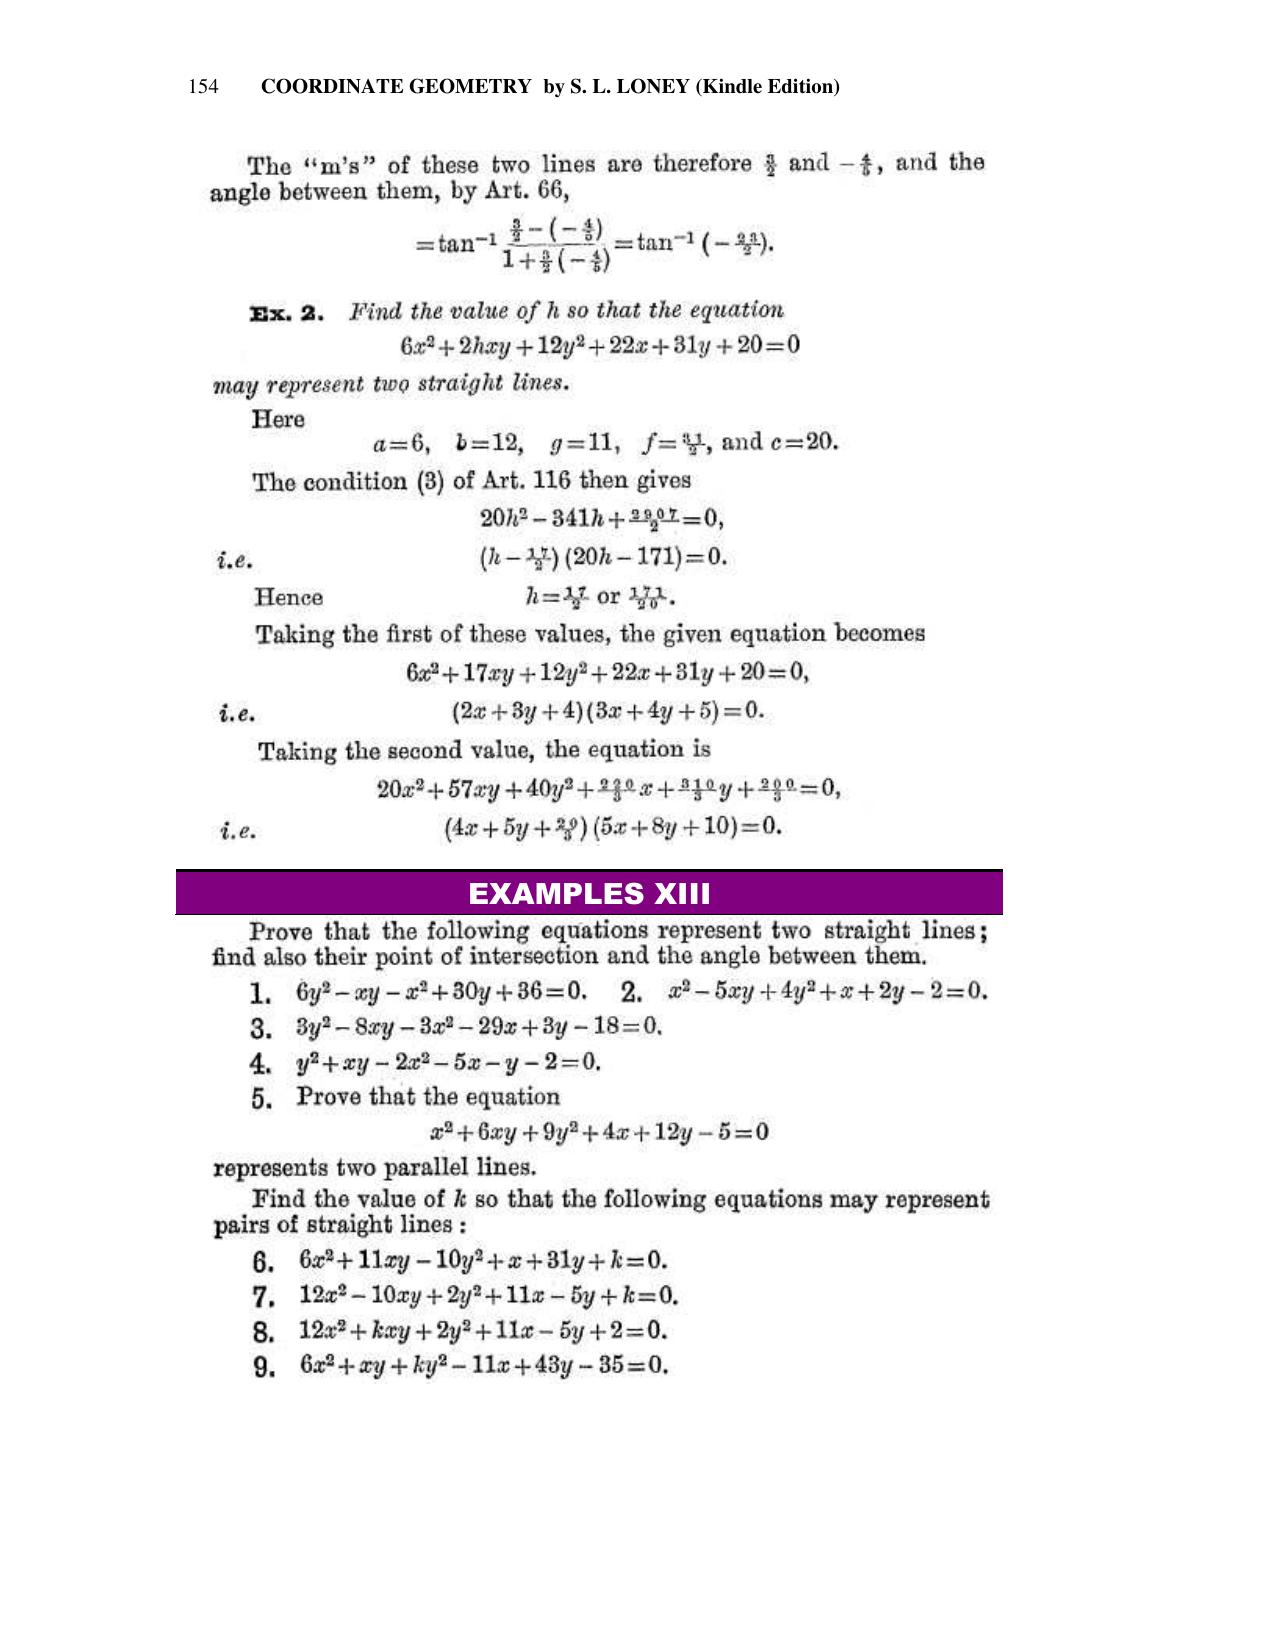 Chapter 6: On Equations Representing Two or More Straight Lines - SL Loney Solutions: The Elements of Coordinate Geometry - Page 15